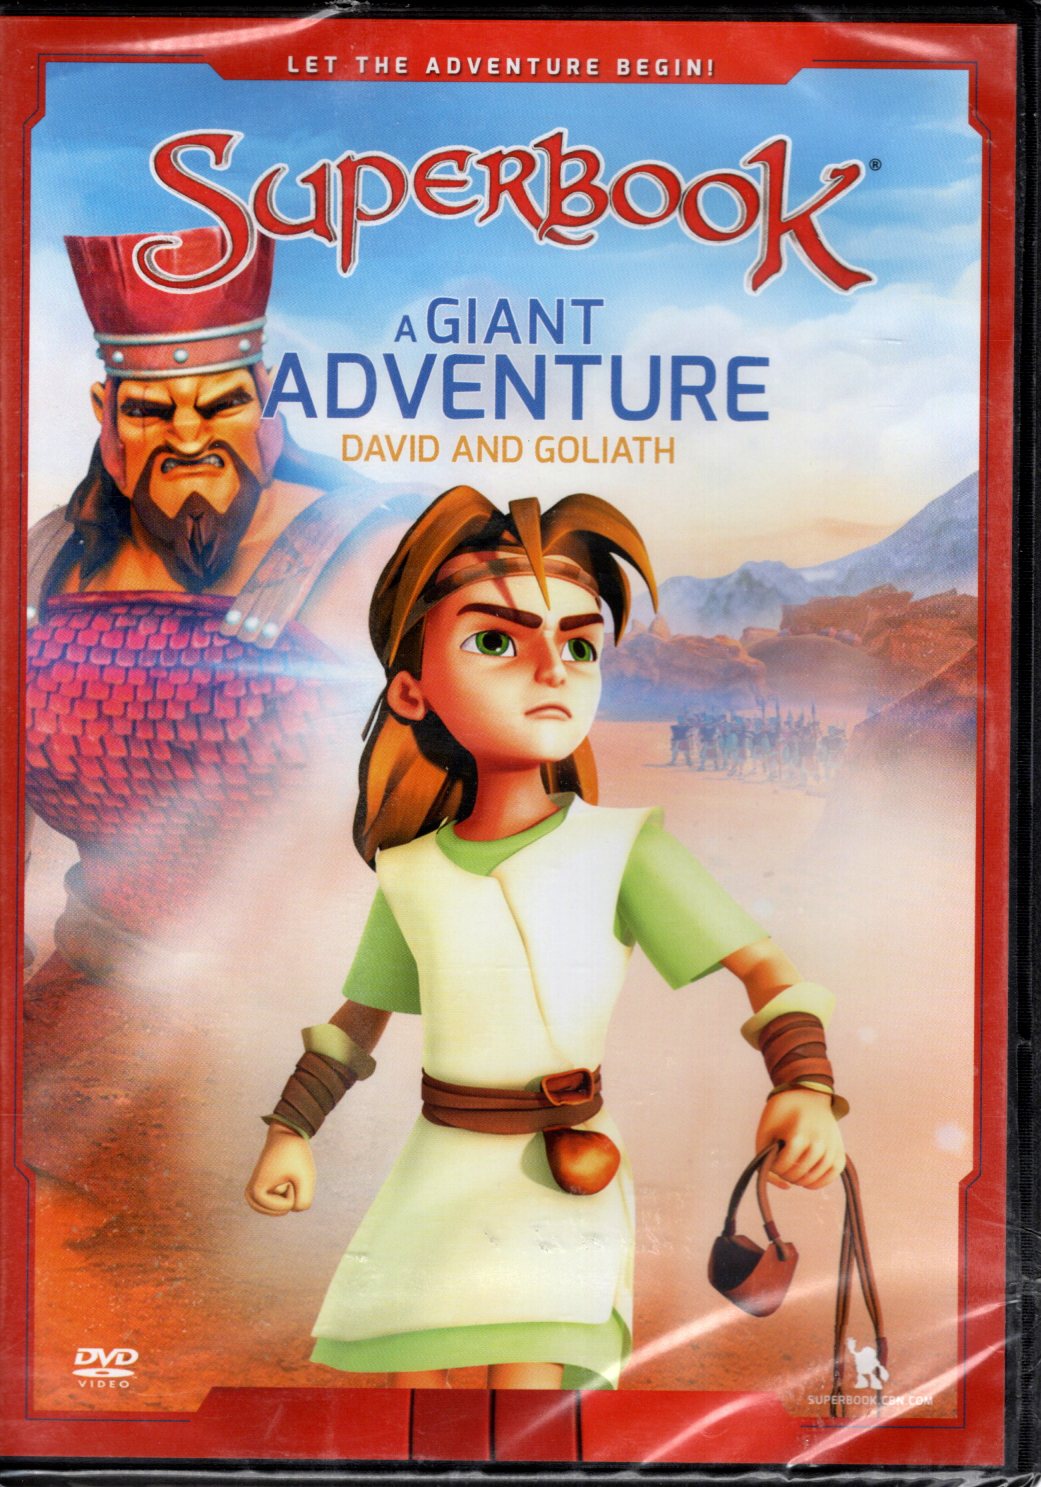 Christian Broadcasting Network - Superbook: A Giant Adventure, David and Goliath - DVD